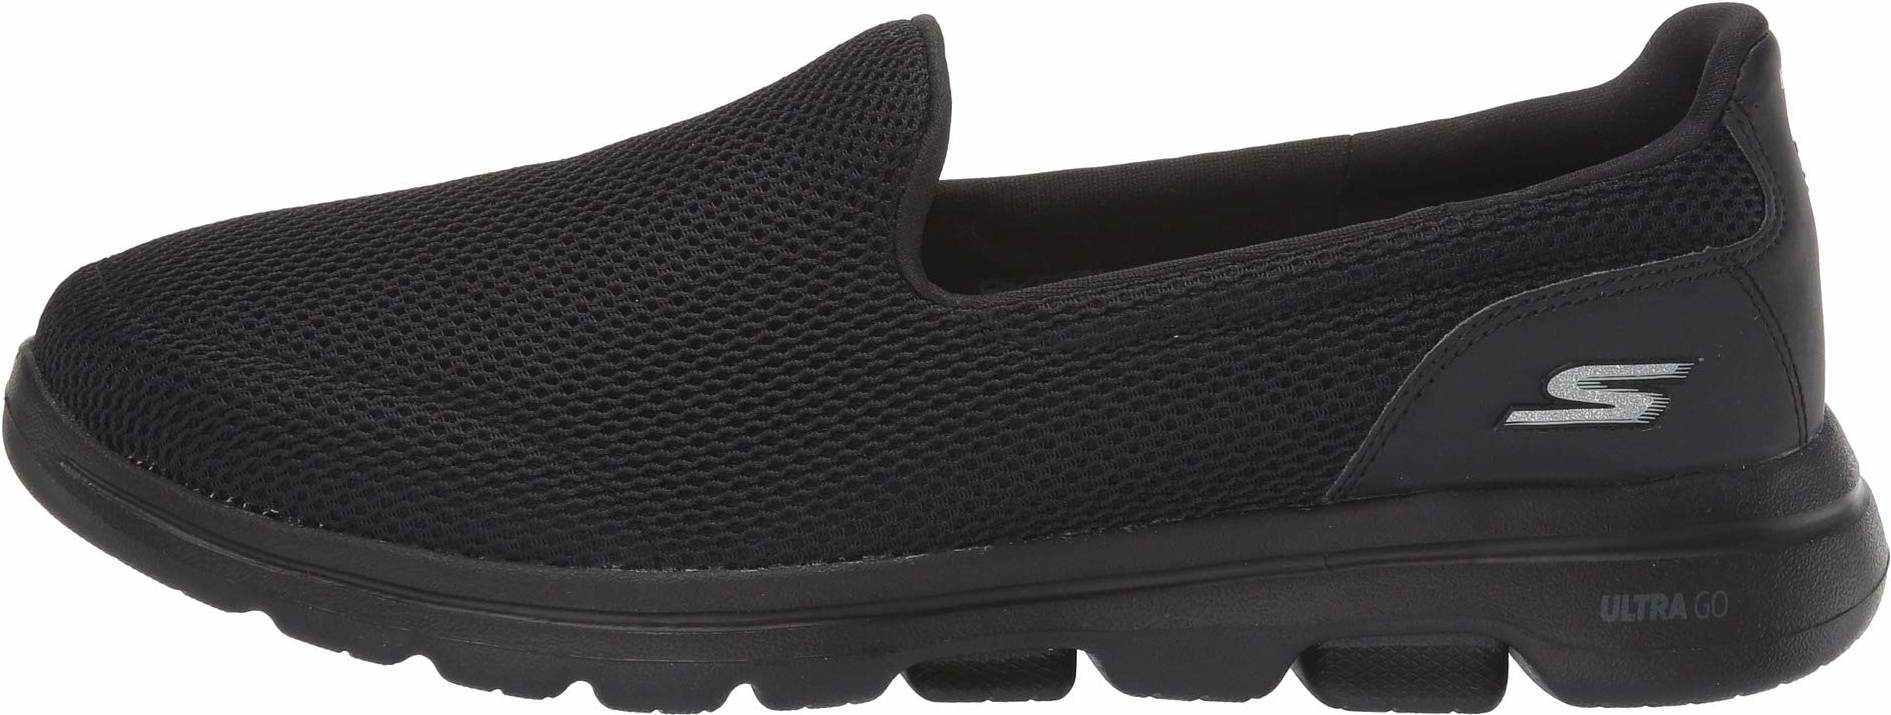 Only £21 + Review of Skechers GOwalk 5 